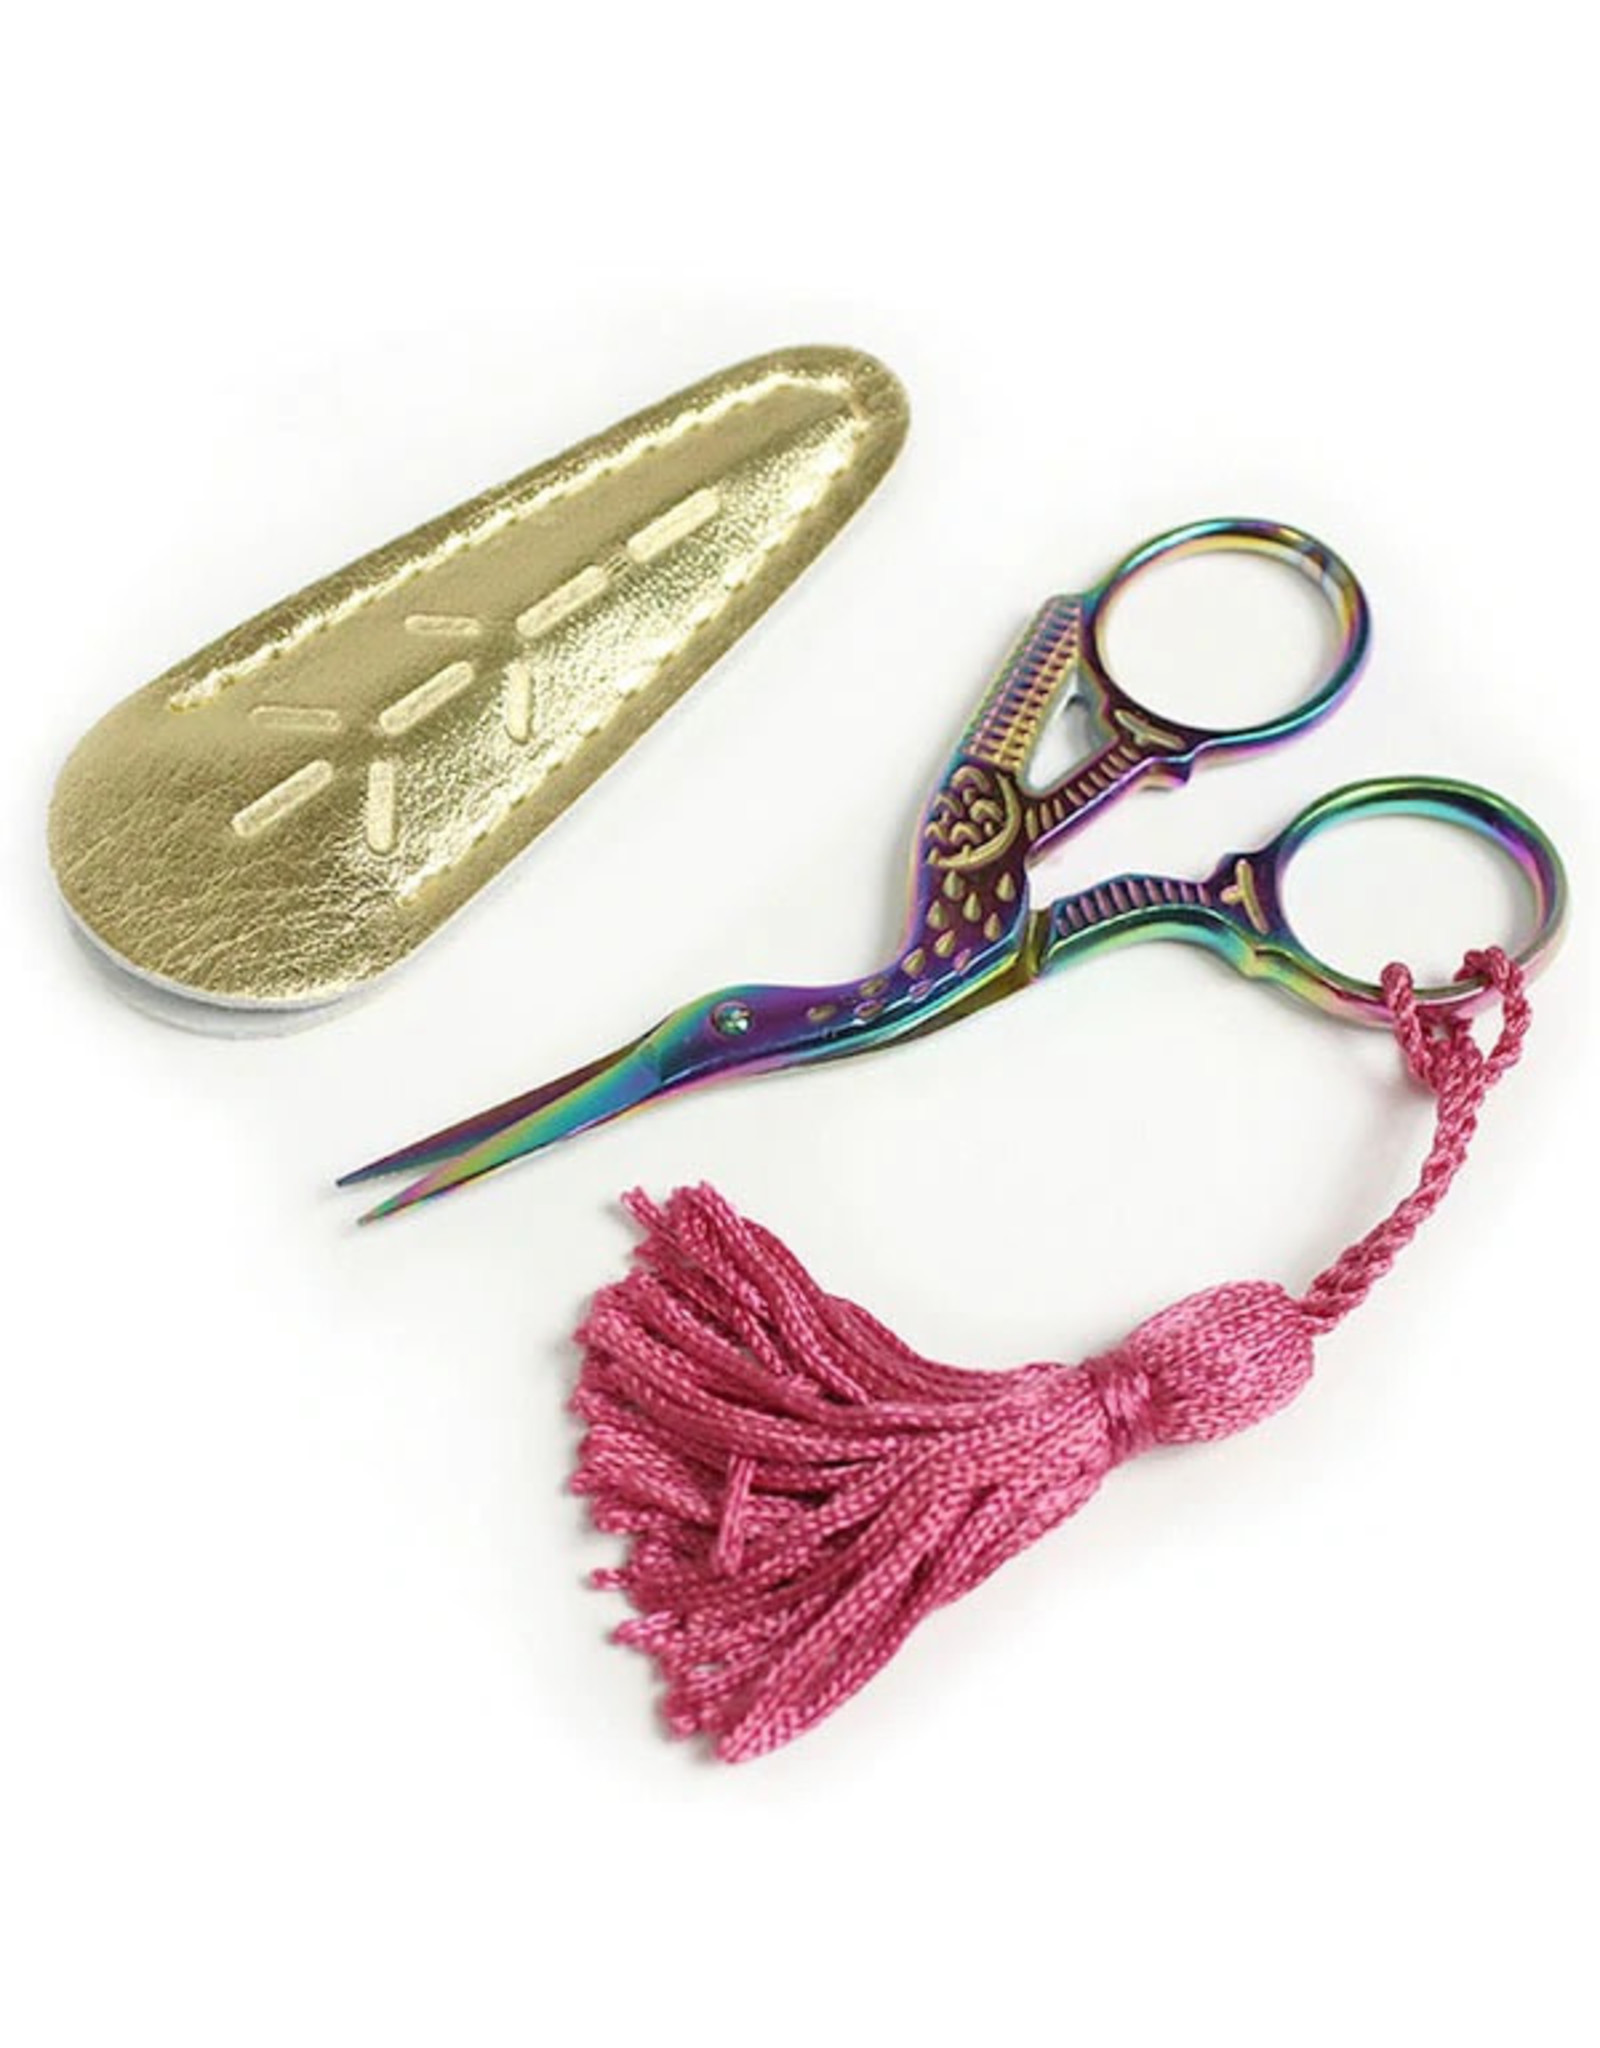 Sublime Stitching Prismatic Stork Embroidery Scissors from Sublime Stitching